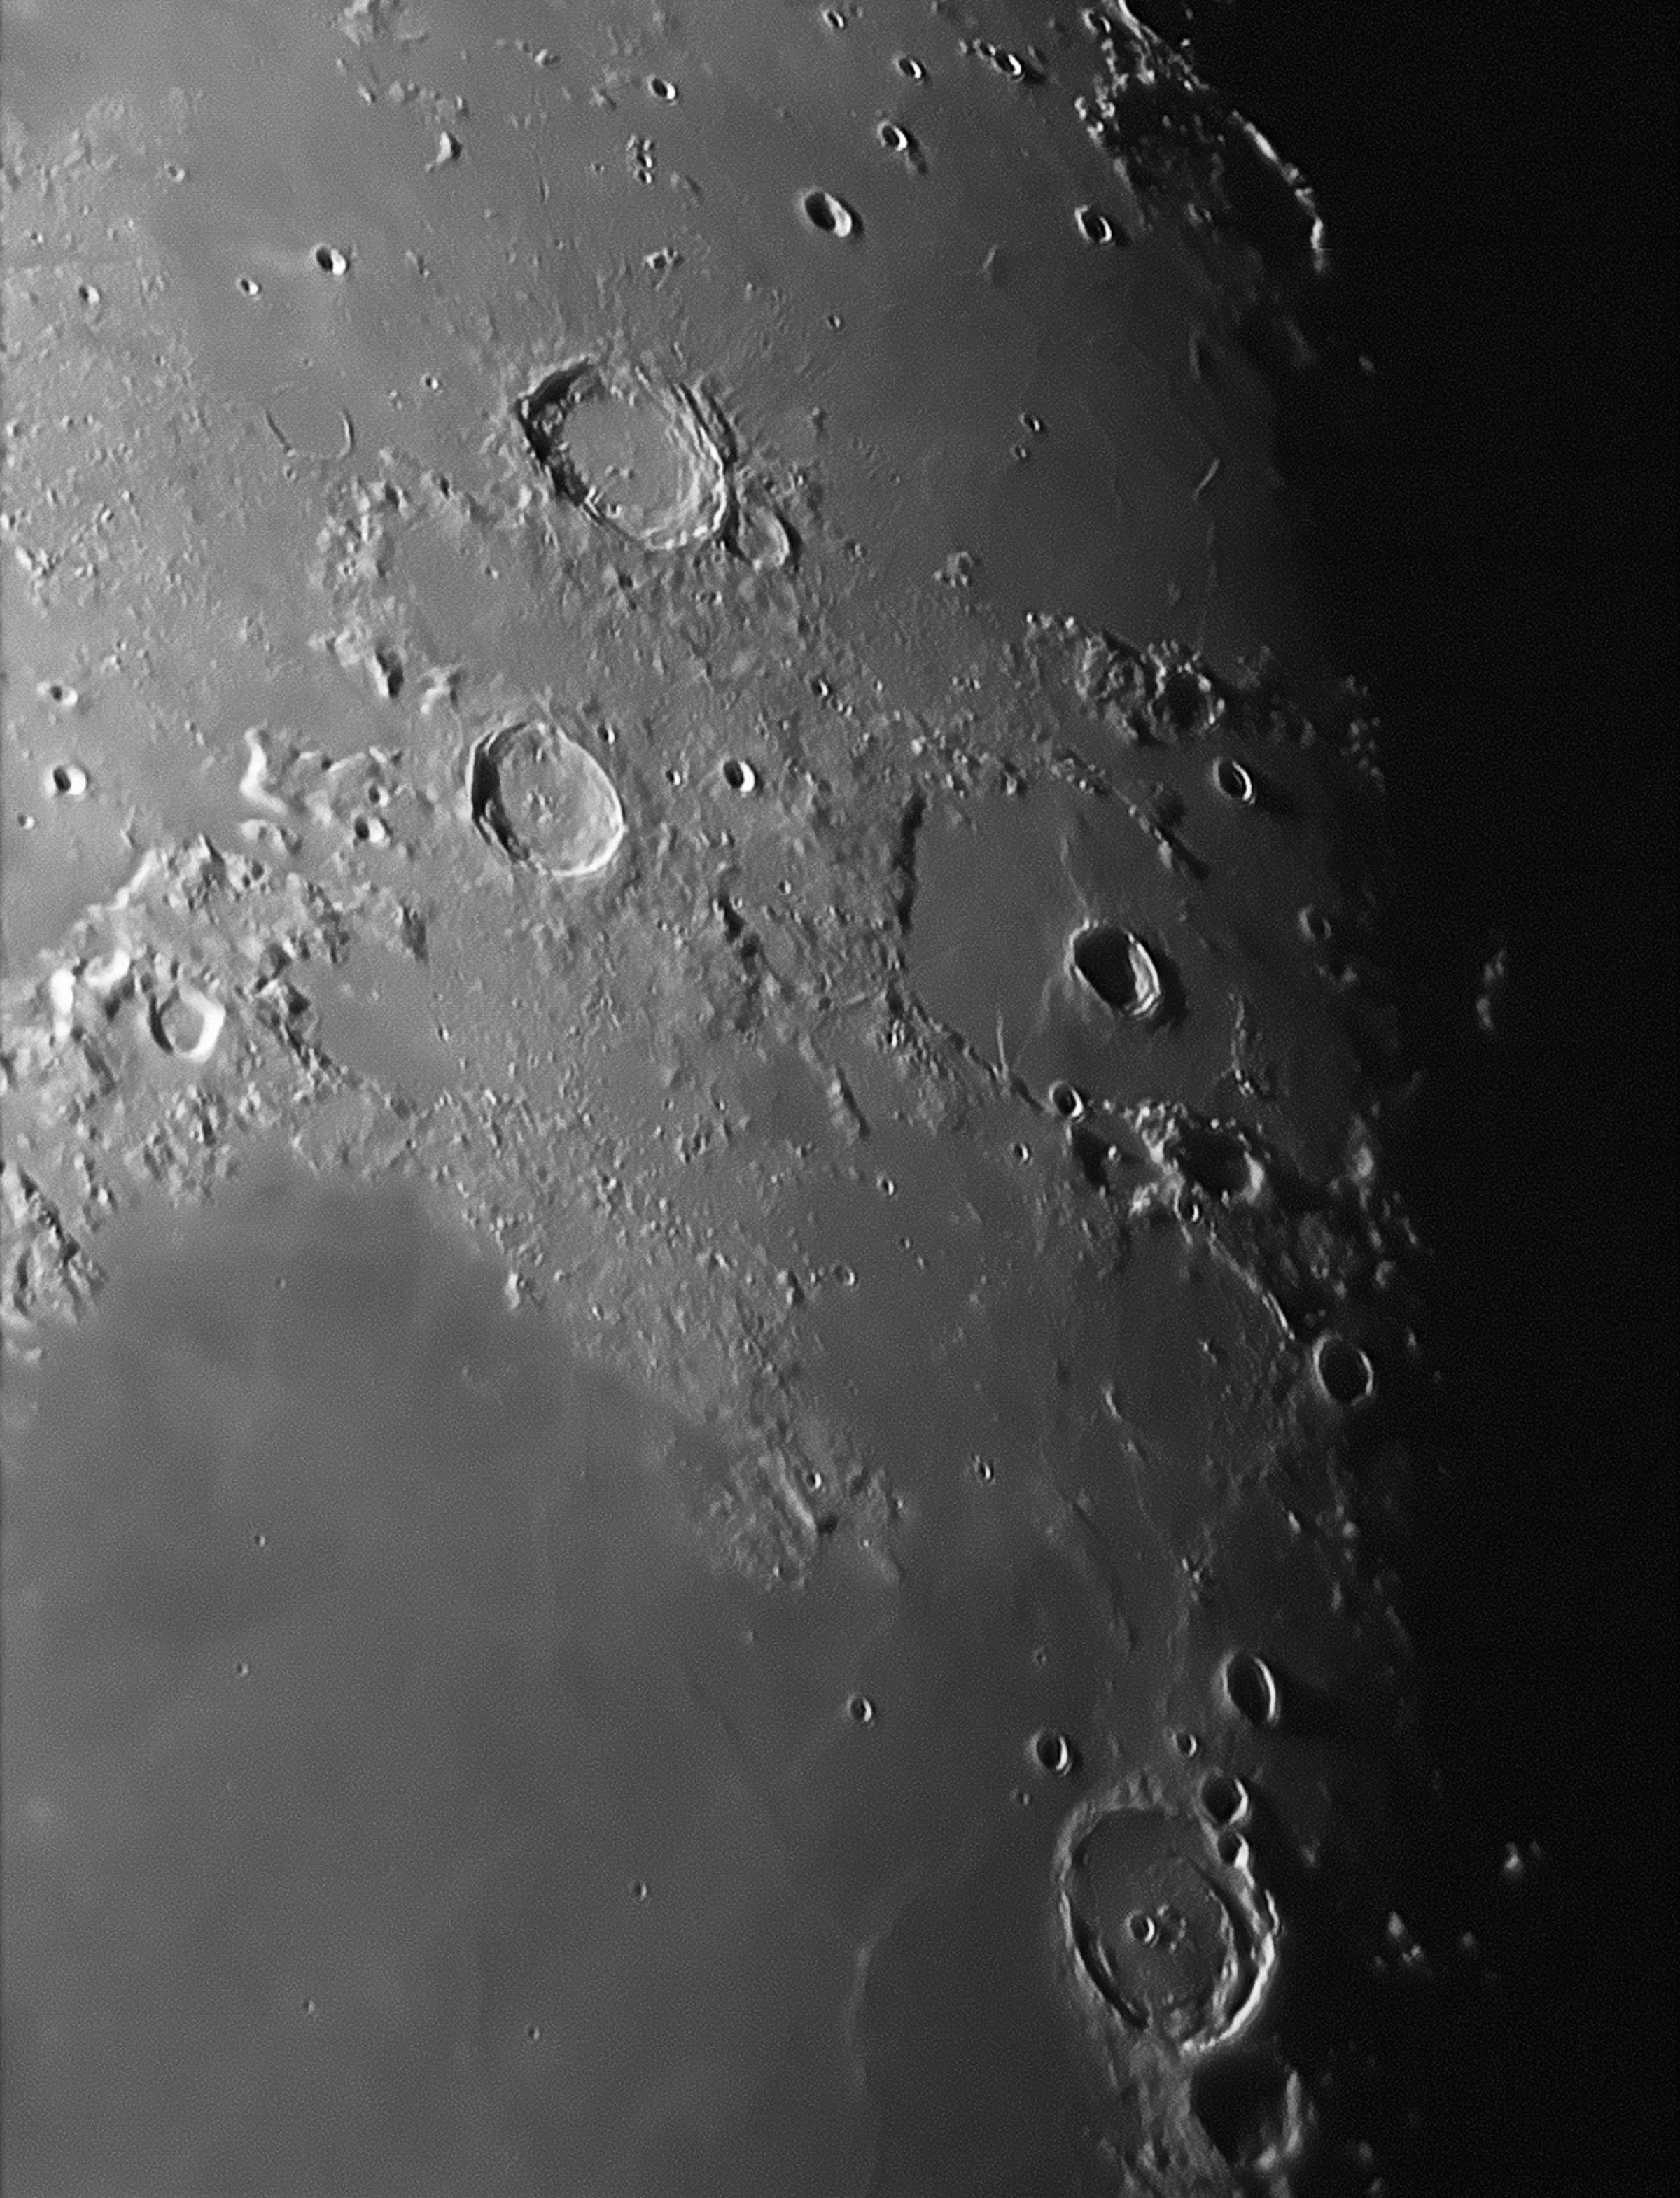 28 - Aristoteles and Eudoxus, the 'Bike Wheel' lunar craters.